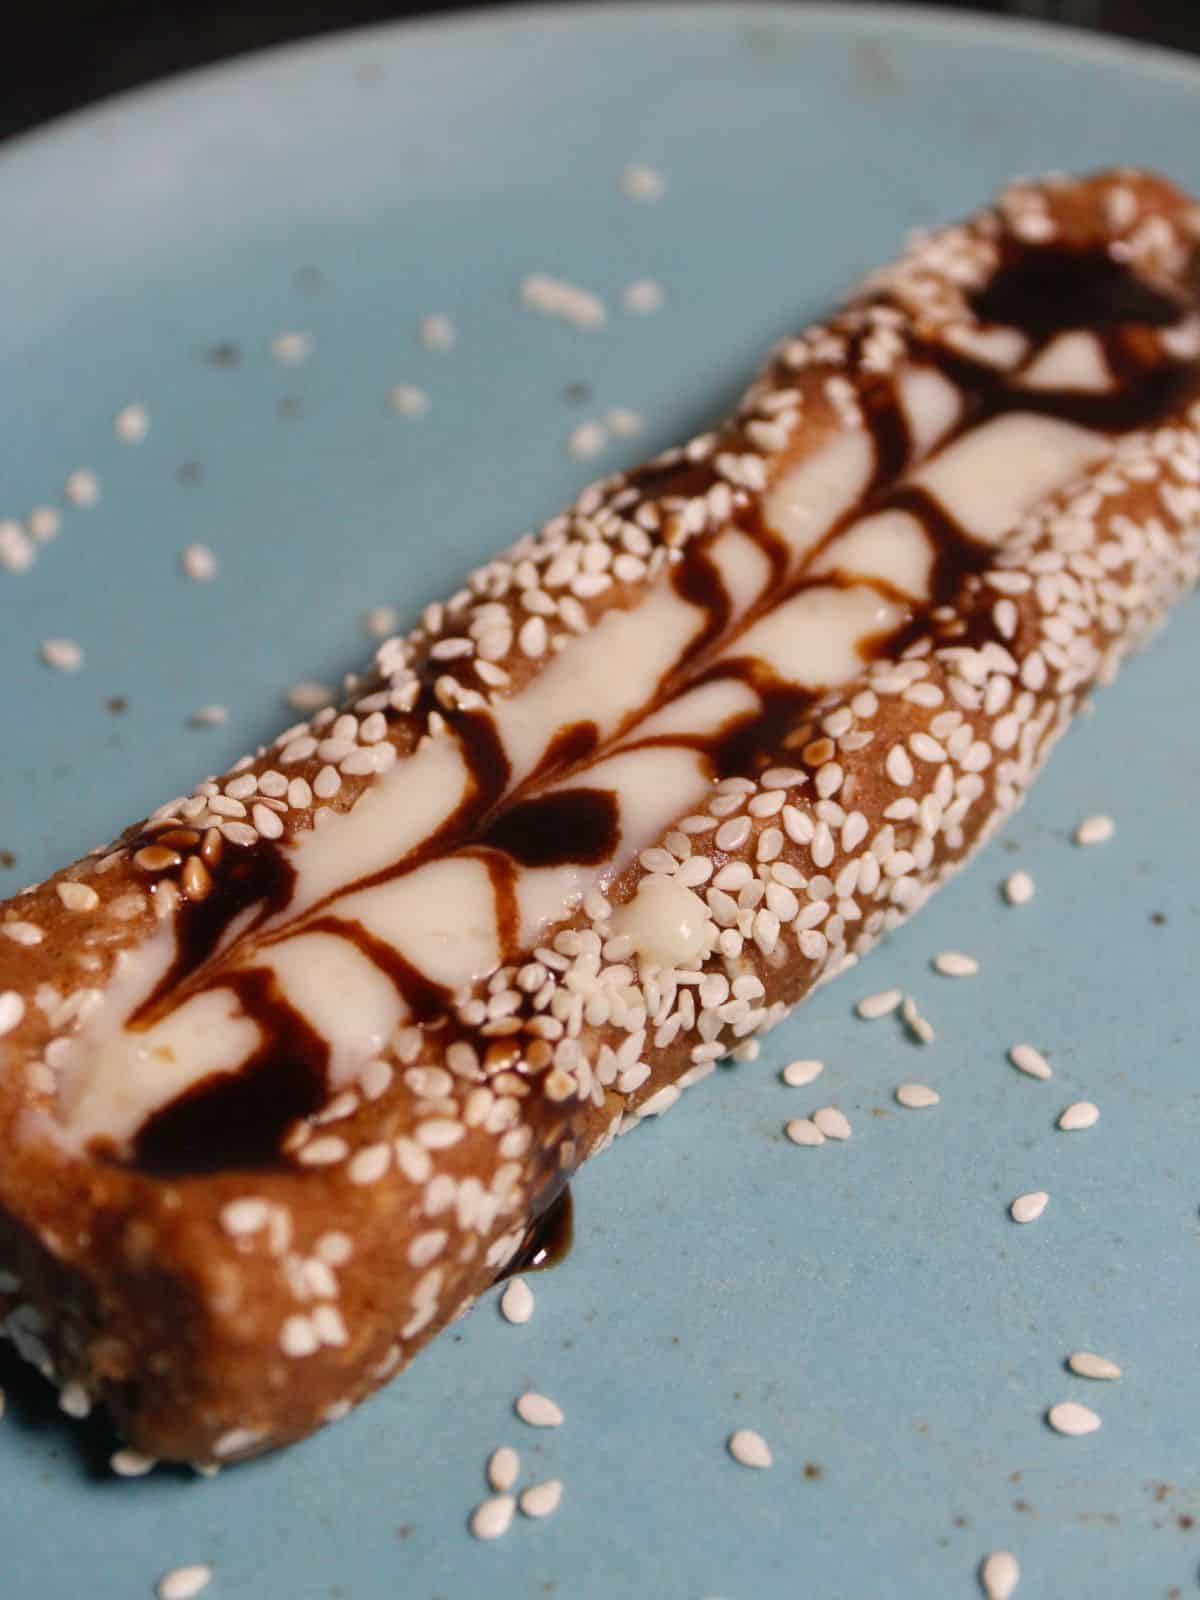 Full stick of Peanut Bites With Chocolate Filling